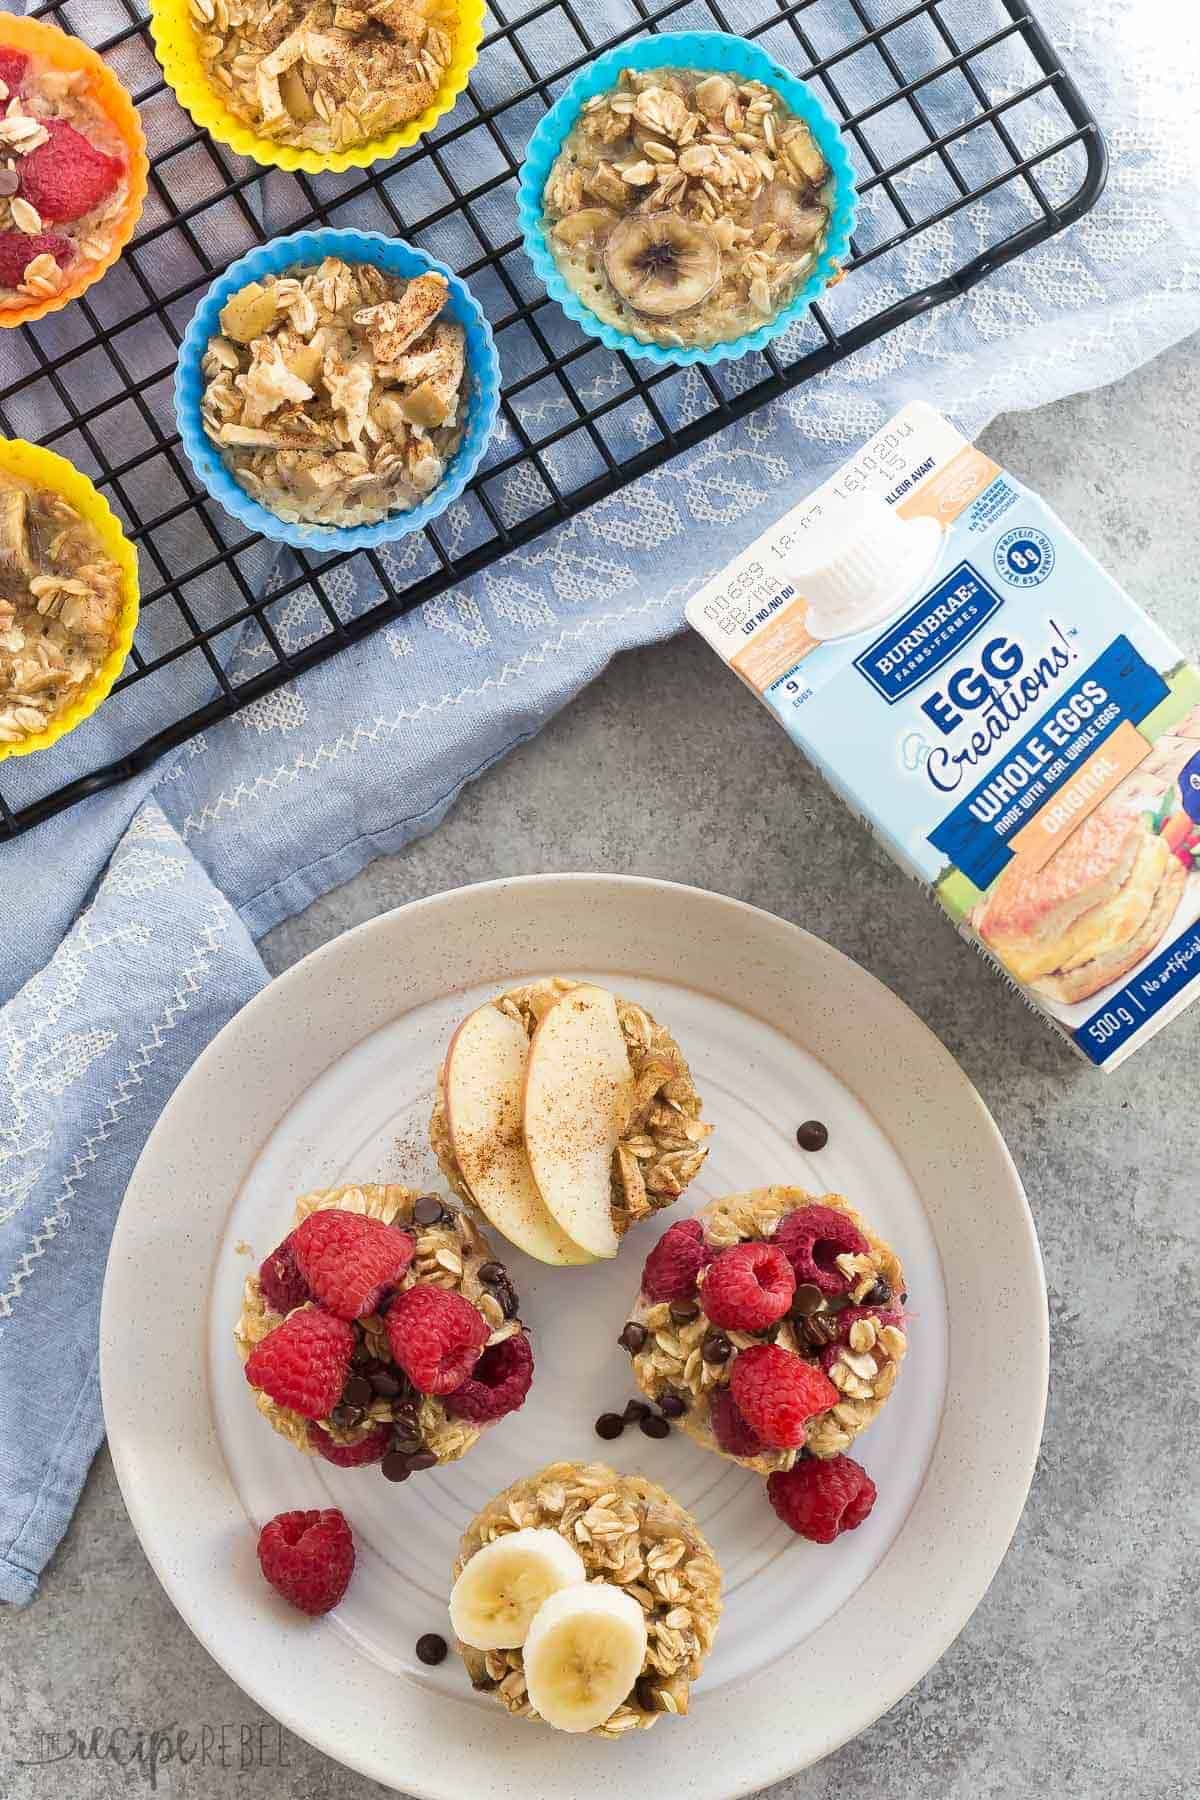 These easy baked oatmeal cups use only FOUR basic ingredients and they're perfect for breakfast, school lunches or snacks! Naturally sweetened, packed with protein, make ahead and freezer friendly with 3 different variations: raspberry chocolate chip, peanut butter banana and apple cinnamon.